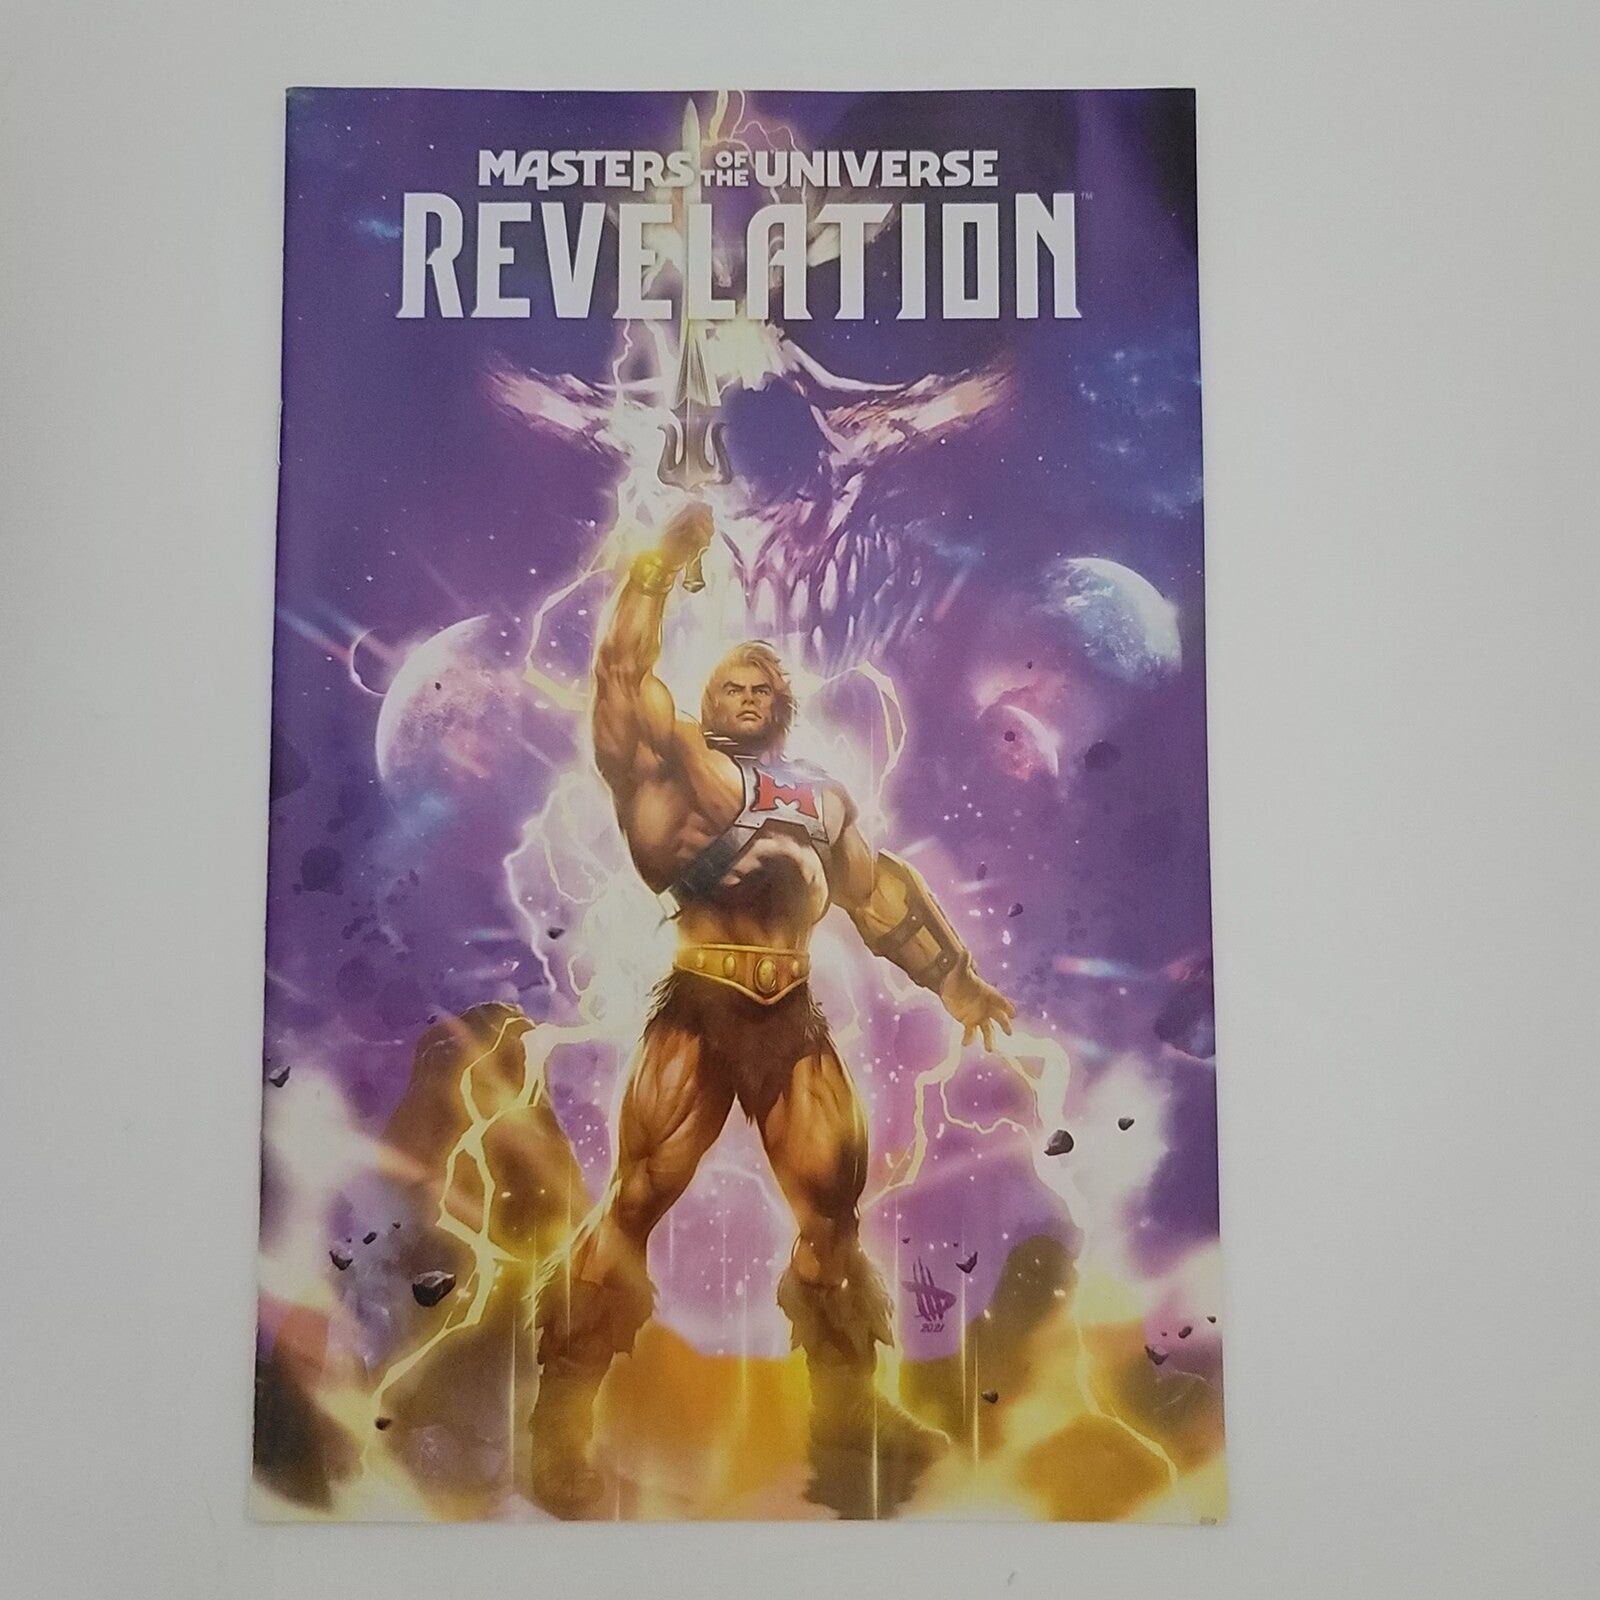 Masters of the Universe Revelation #1 Wilkins Variant Limited to 1000